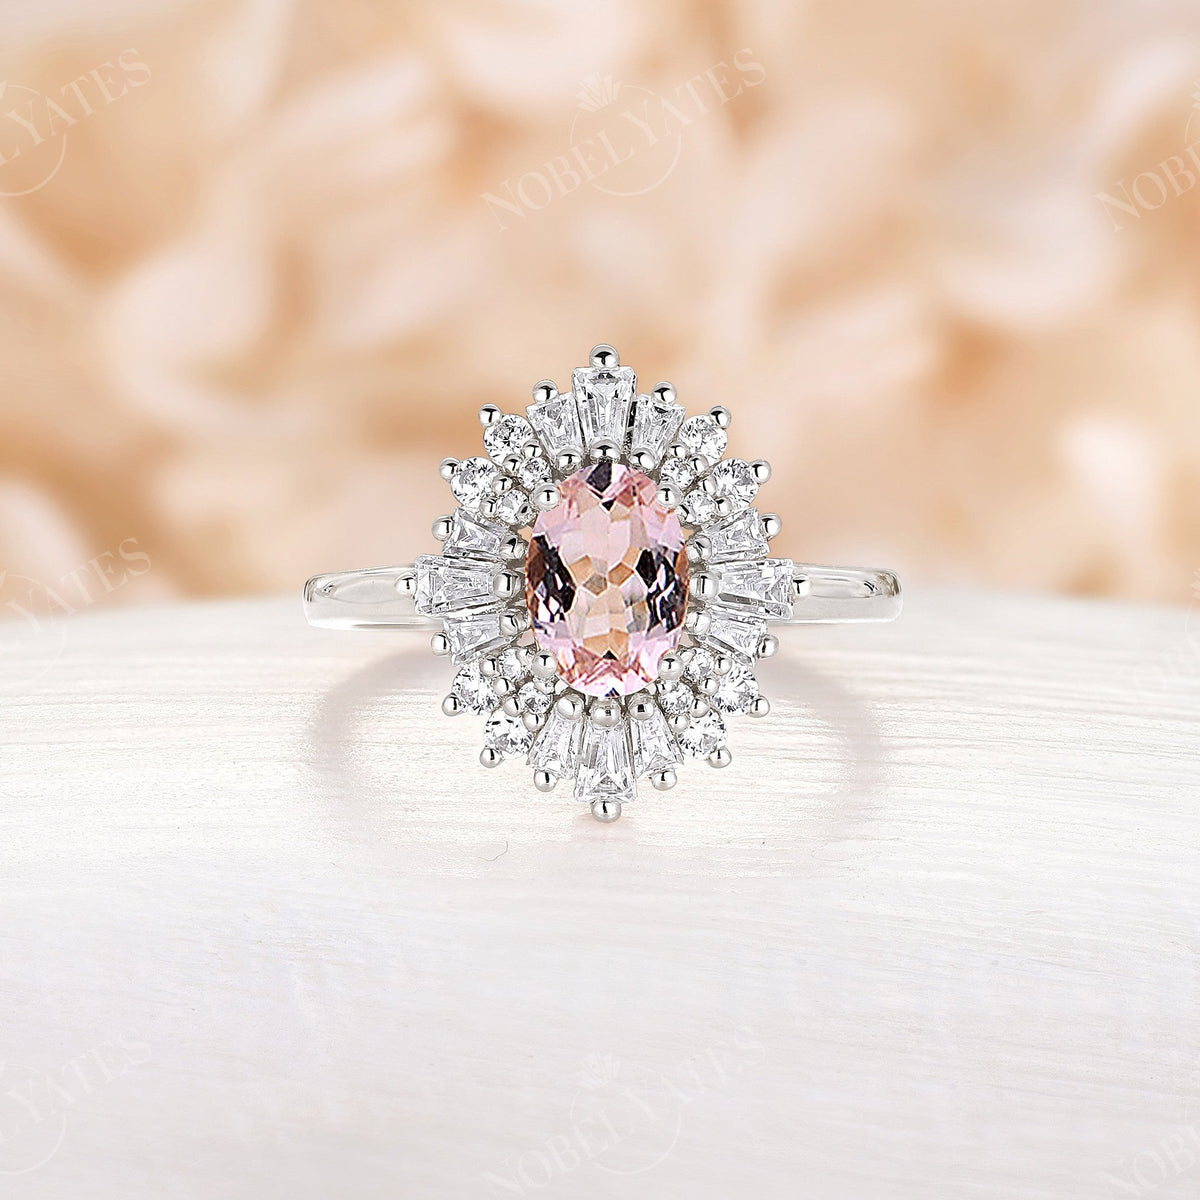 Oval Pink Morganite Art deco Halo Engagement Ring Rose Gold